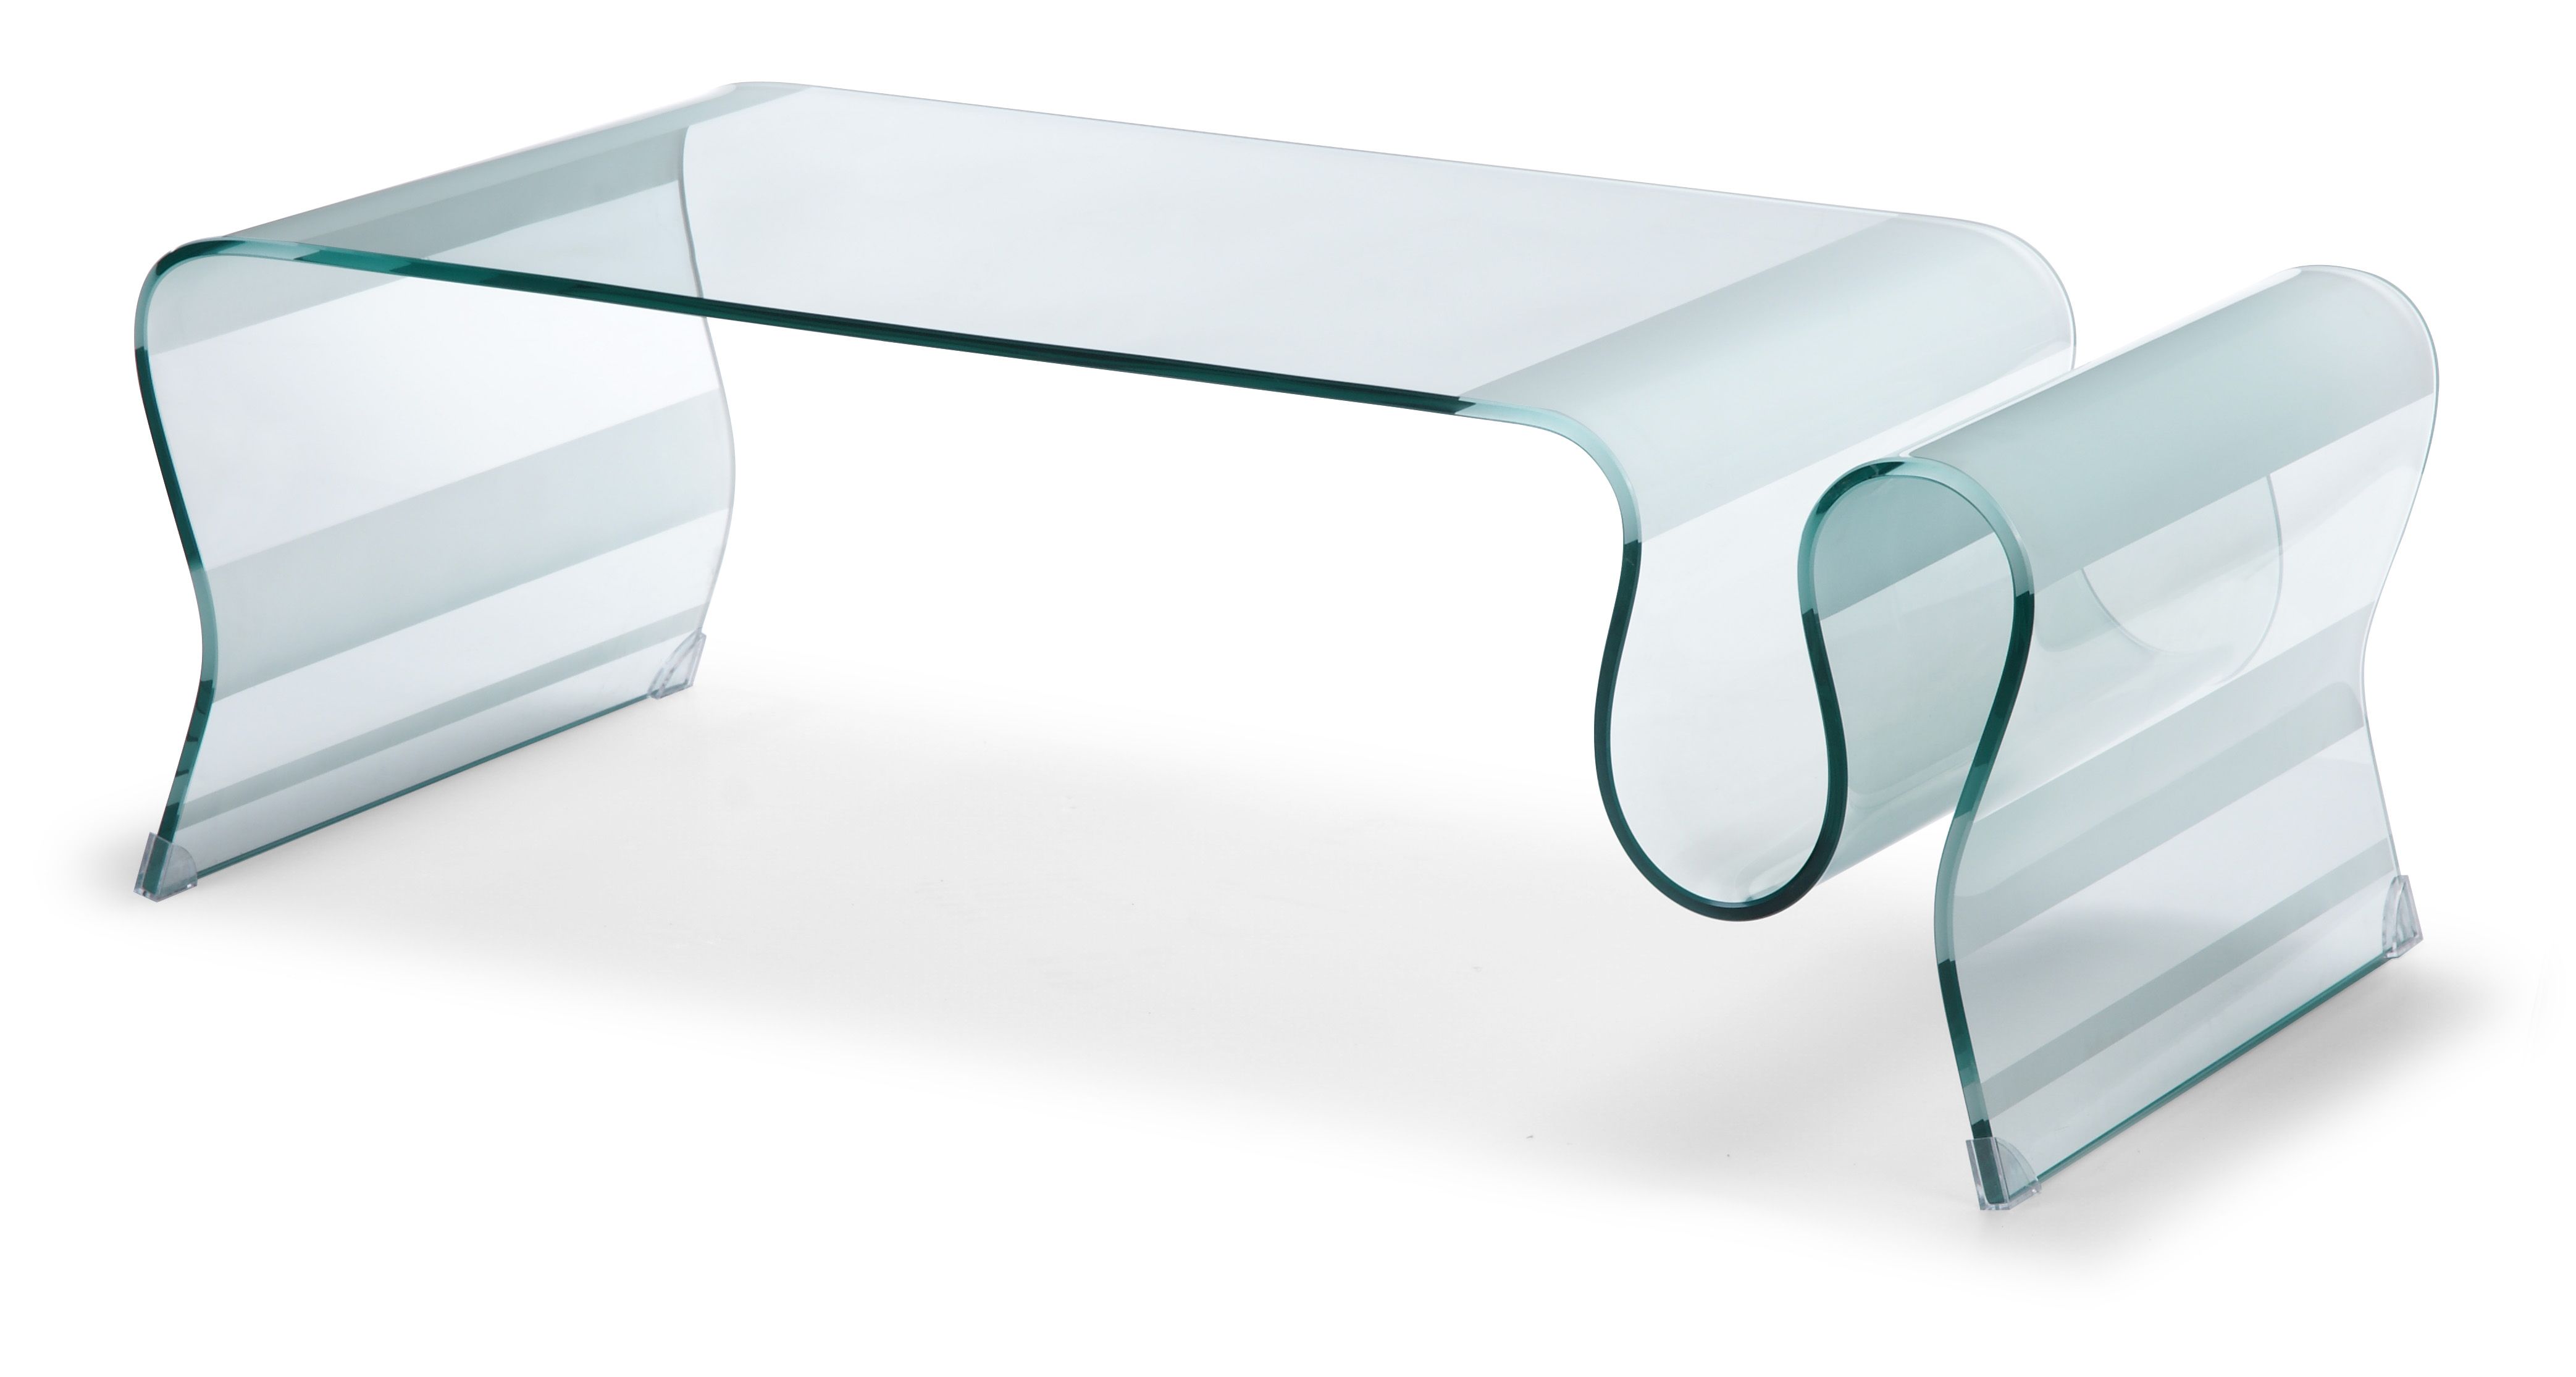 Tempered Glass Coffee Table Coffee Table Becomes The Supporting Furniture That Will Make Your Room Greater (View 2 of 10)